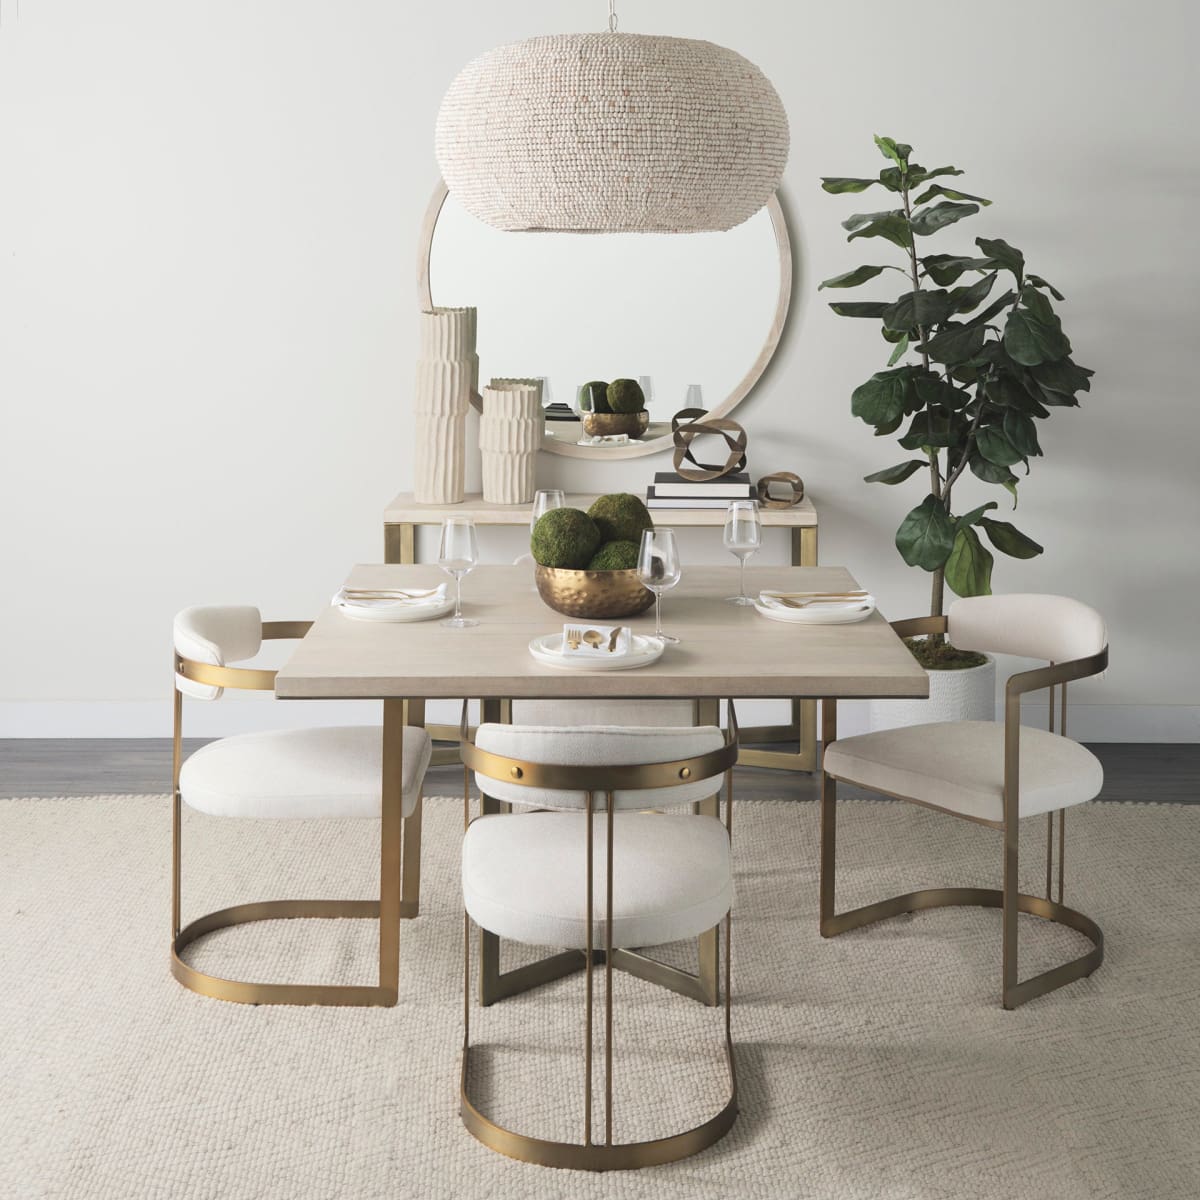 Faye Square Dining Table Light Brown Wood | Square - dining-table